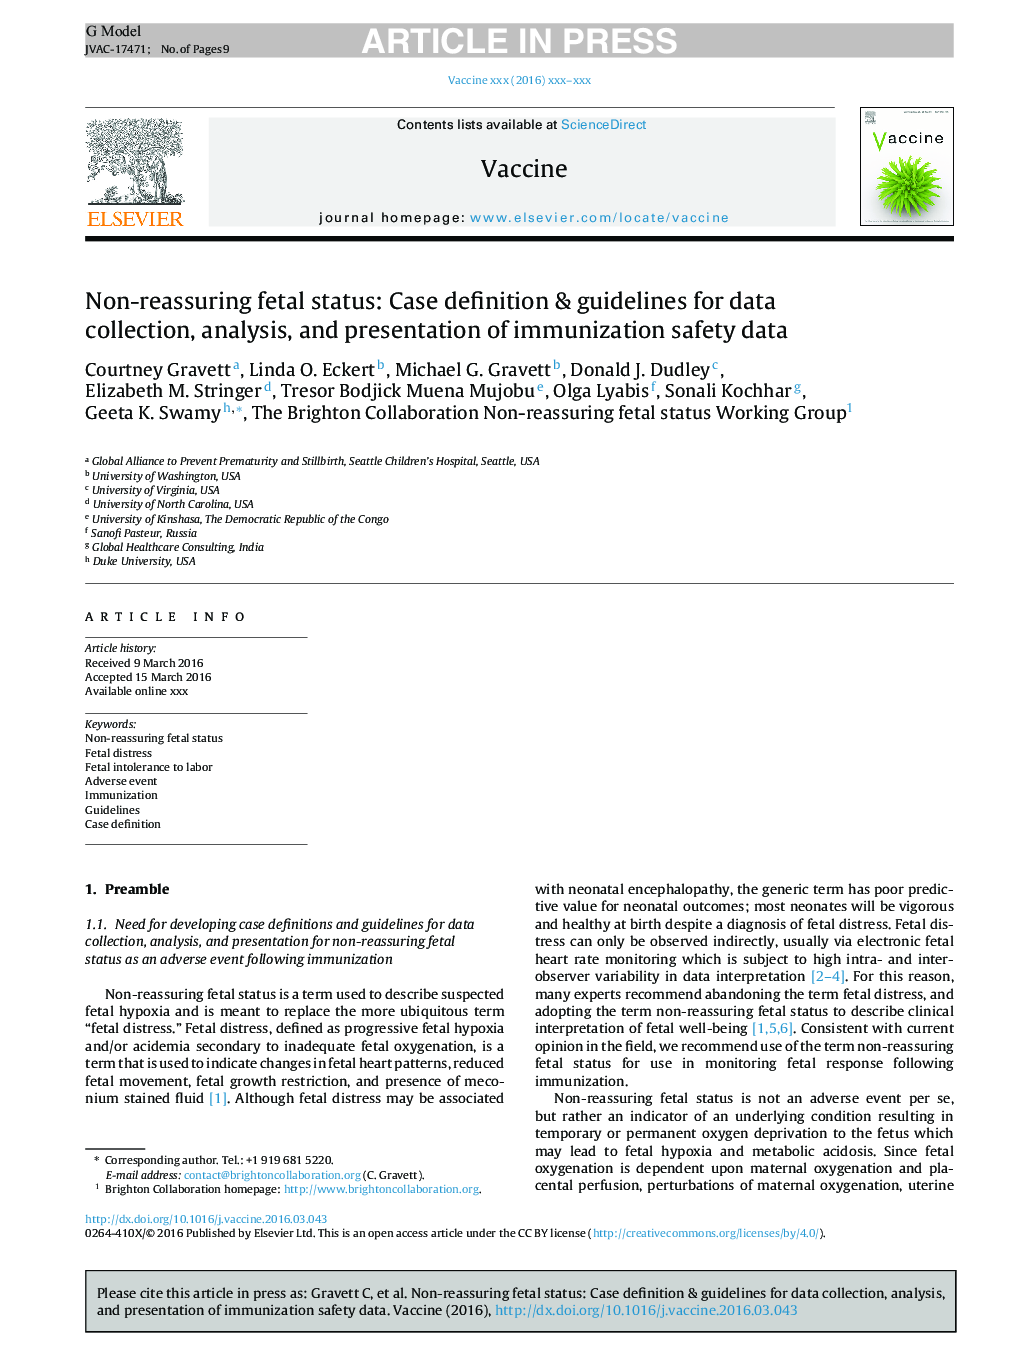 Non-reassuring fetal status: Case definition & guidelines for data collection, analysis, and presentation of immunization safety data